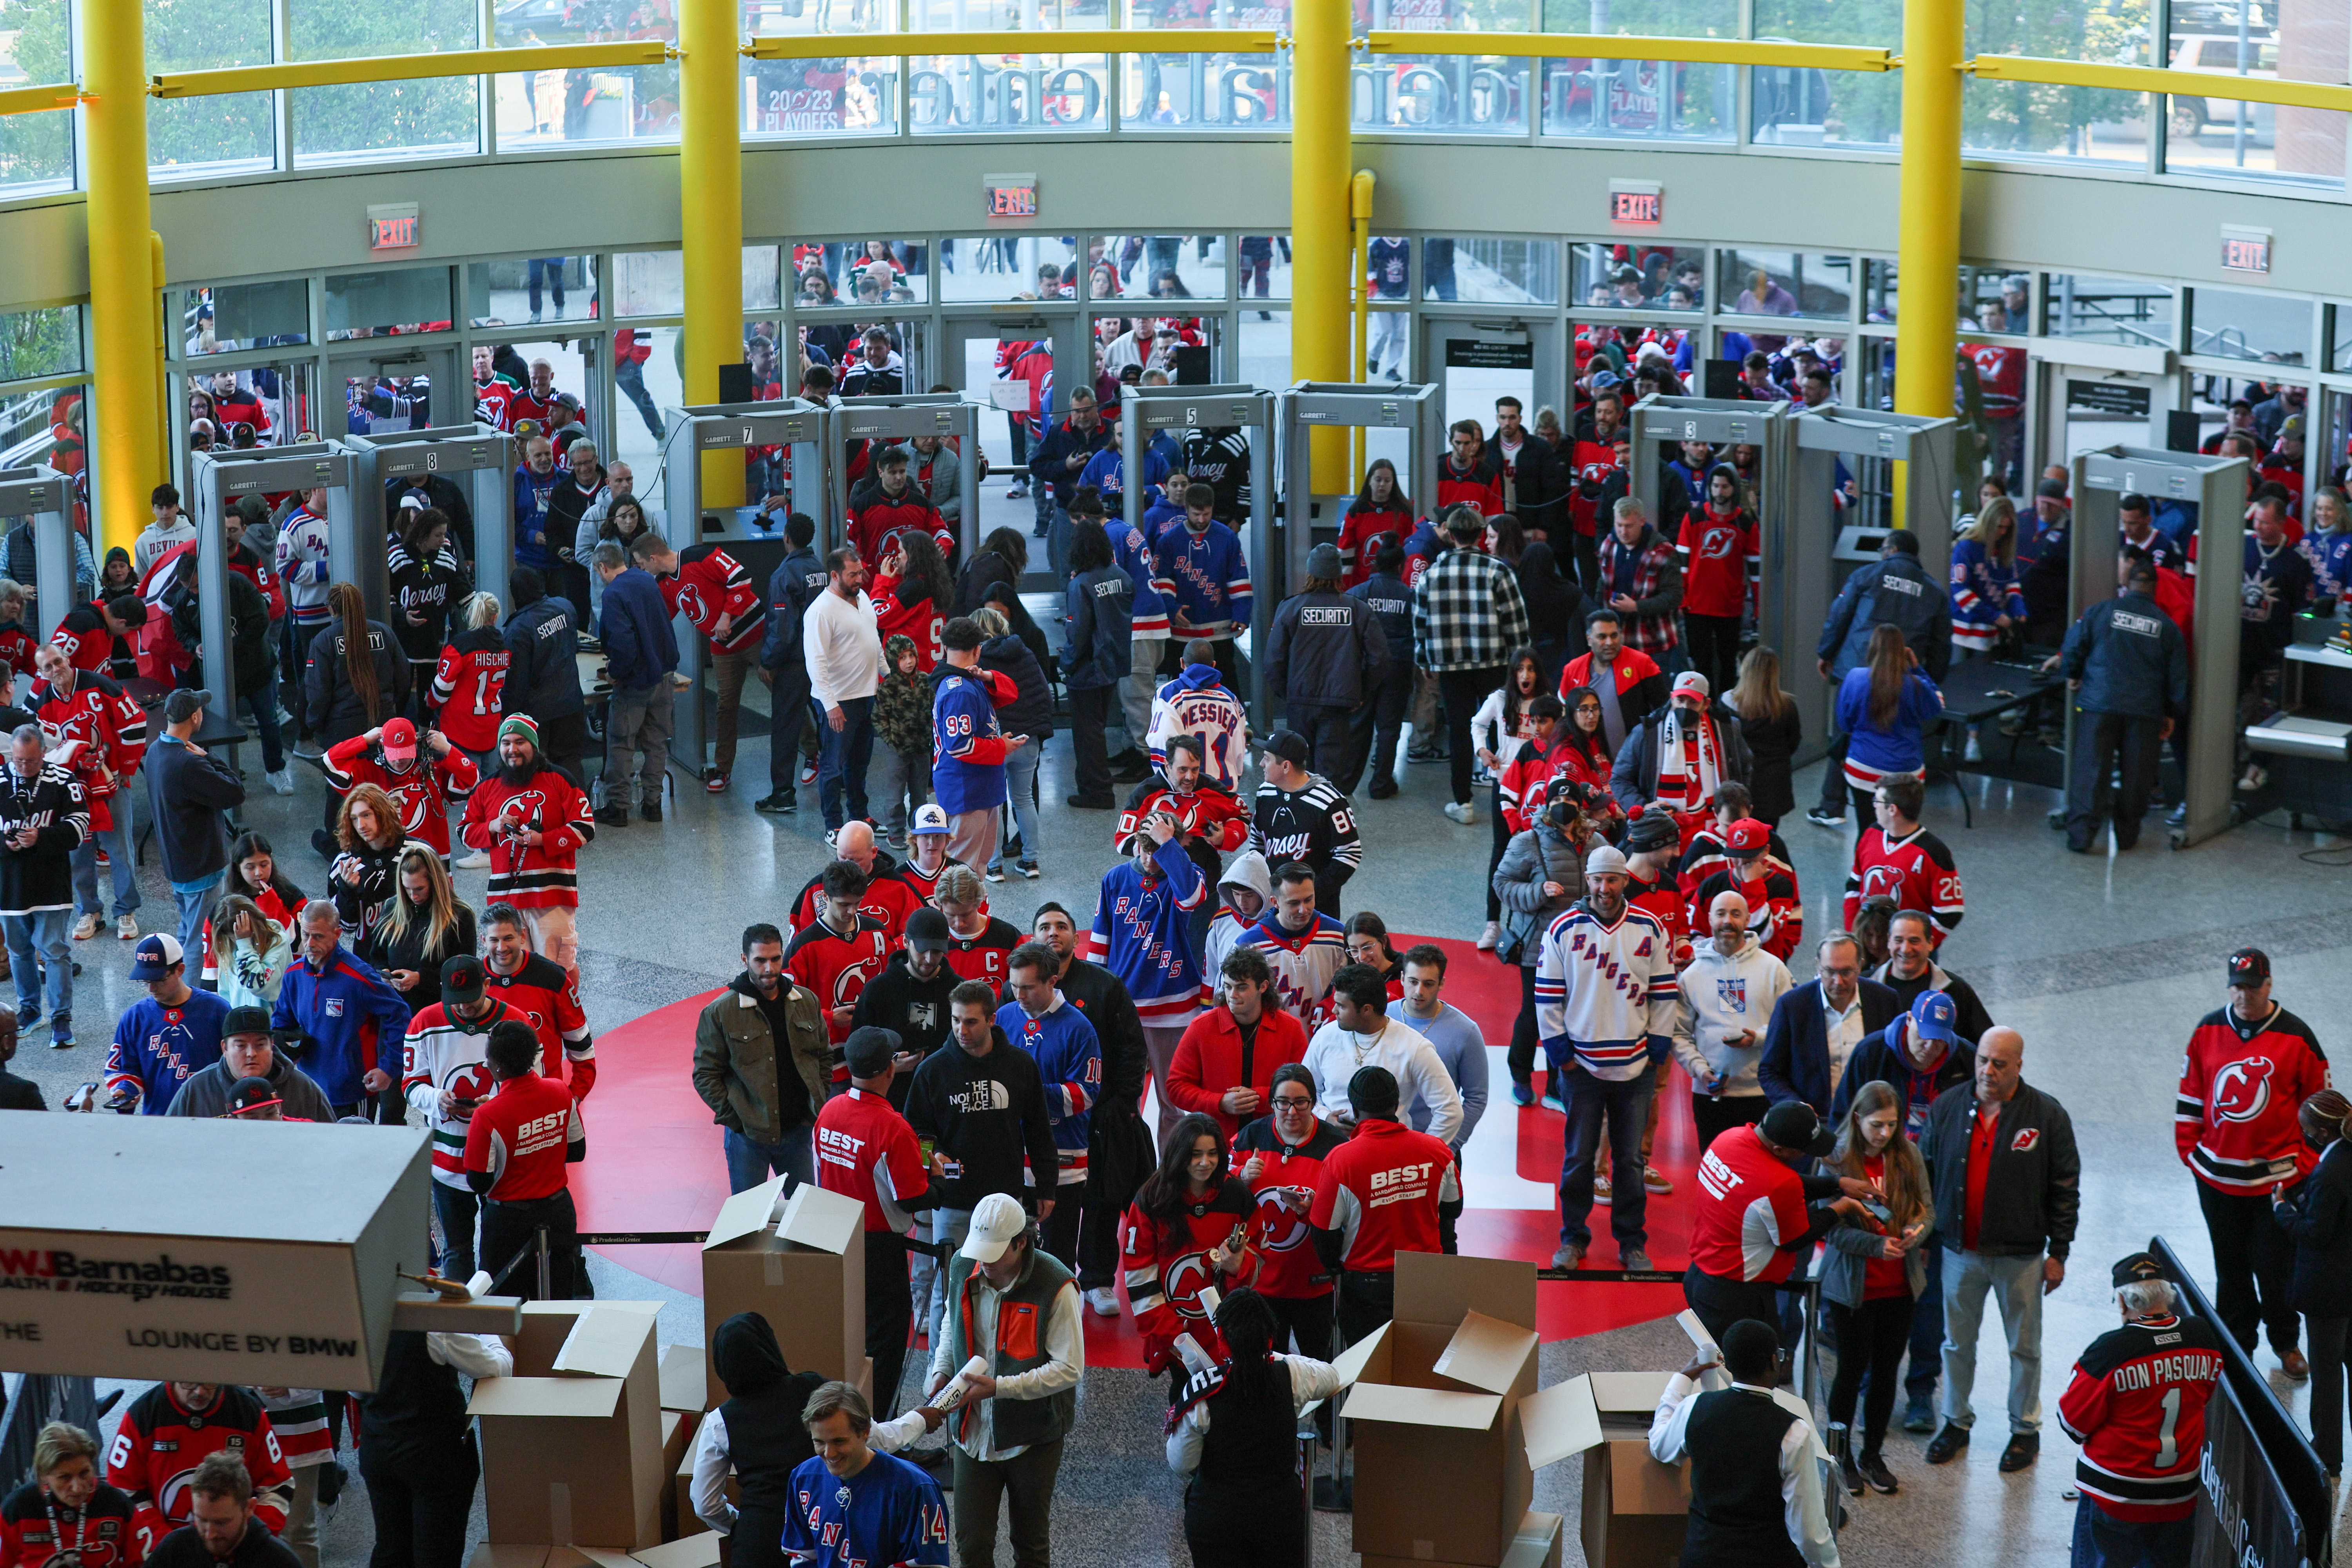 Fans pass through security metal detectors as they arrive at Prudential Center for Game 1 of the Stanley Cup playoffs series between the New Jersey Devils and the New York Rangers on Tuesday, April 18, 2023 in Newark, N.J. 